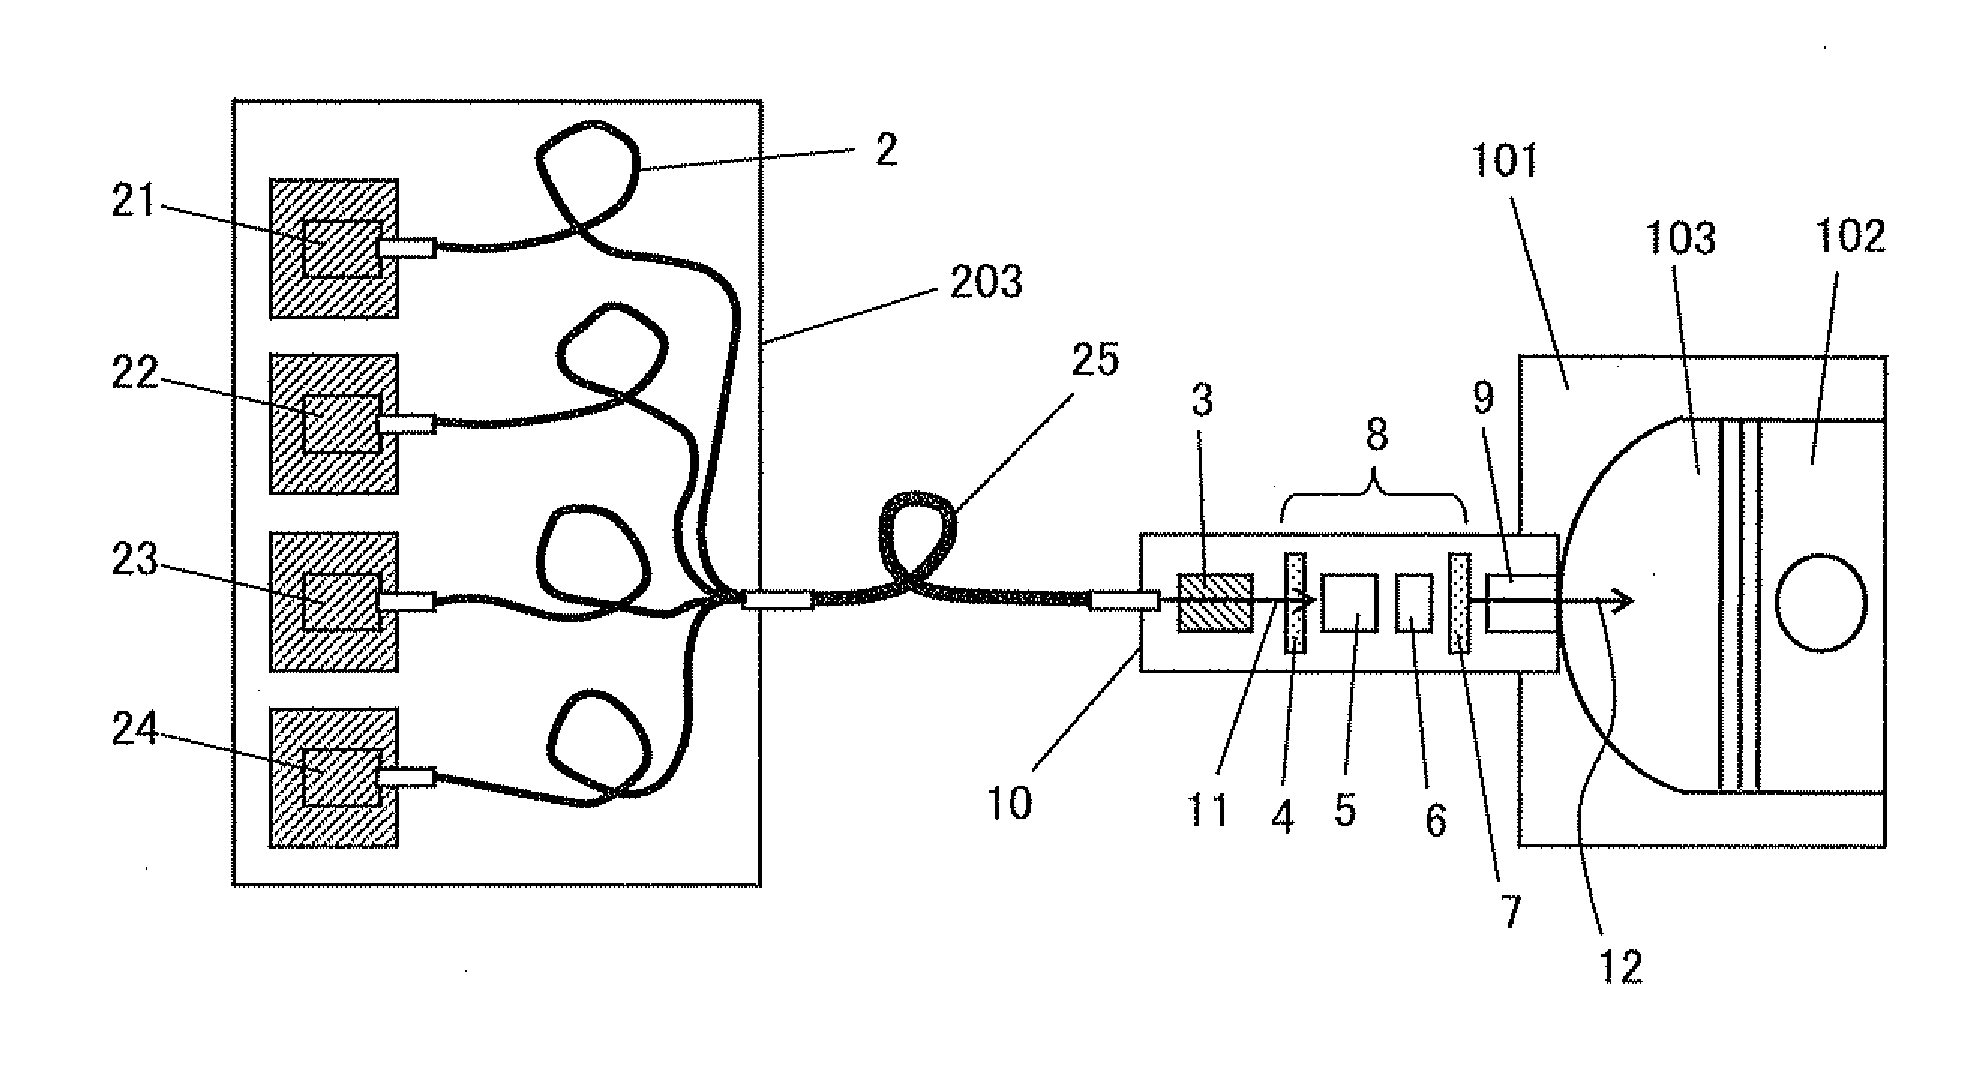 Semiconductor laser pumped solid-state laser device for engine ignition